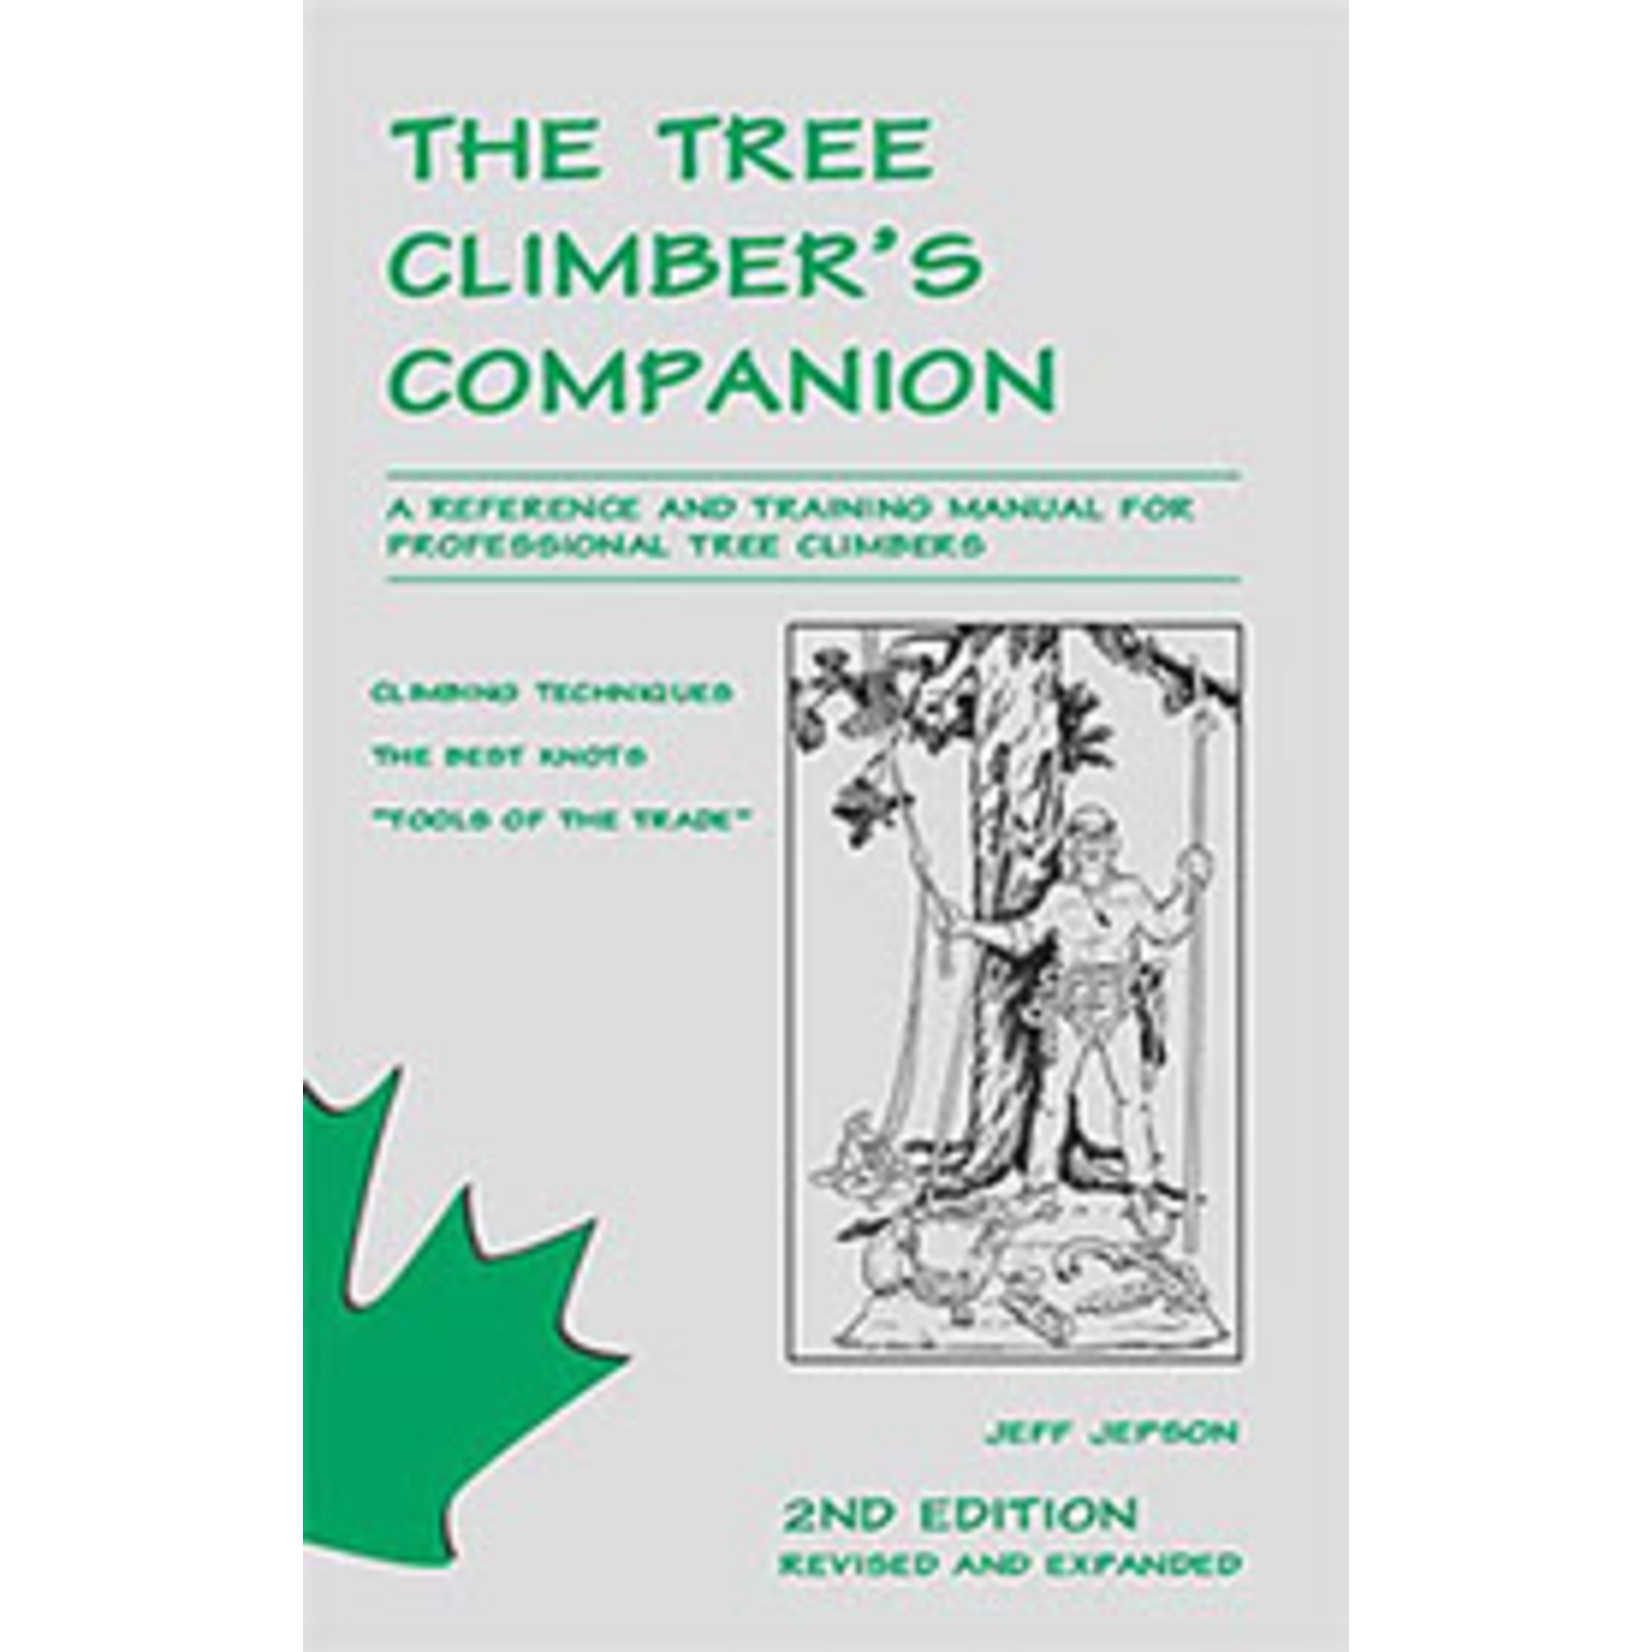 Beaver Tree Publishing The Tree Climbers Companion Book by Jeff Jepson 2nd Edition